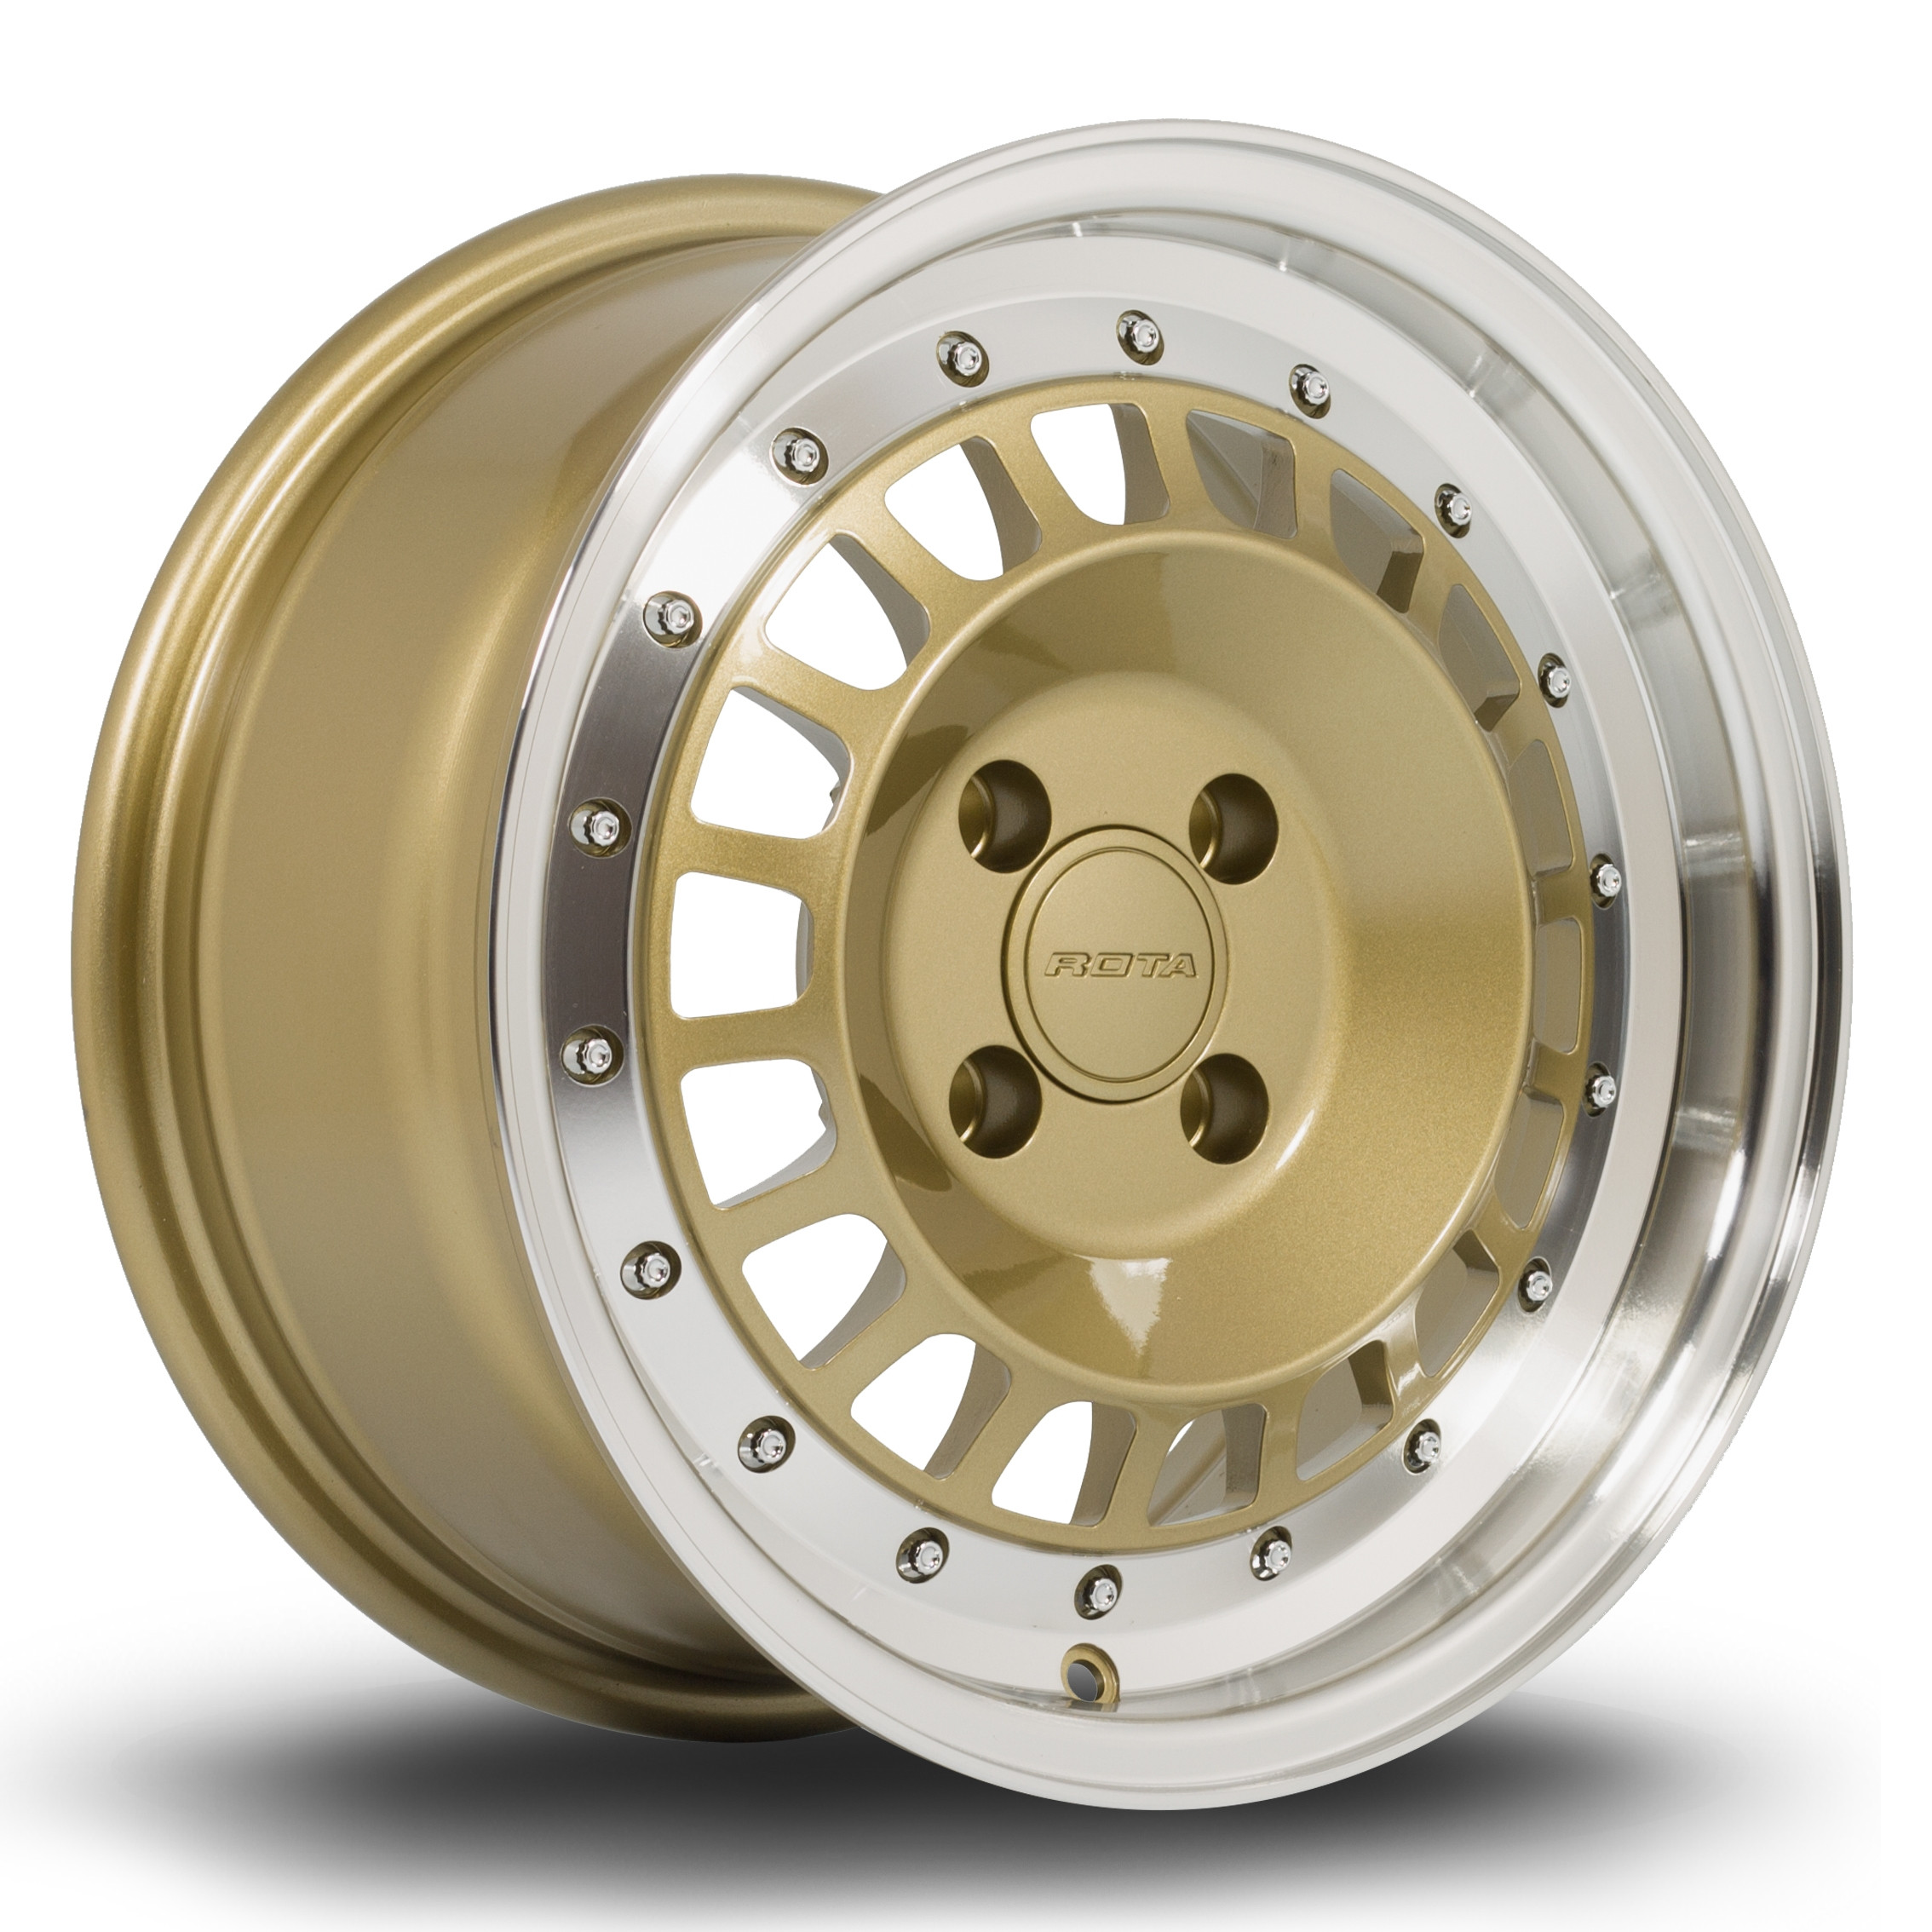 Speciale 15x7 4x100 ET20 Gold with Polished Lip - Tyre Size Calculator